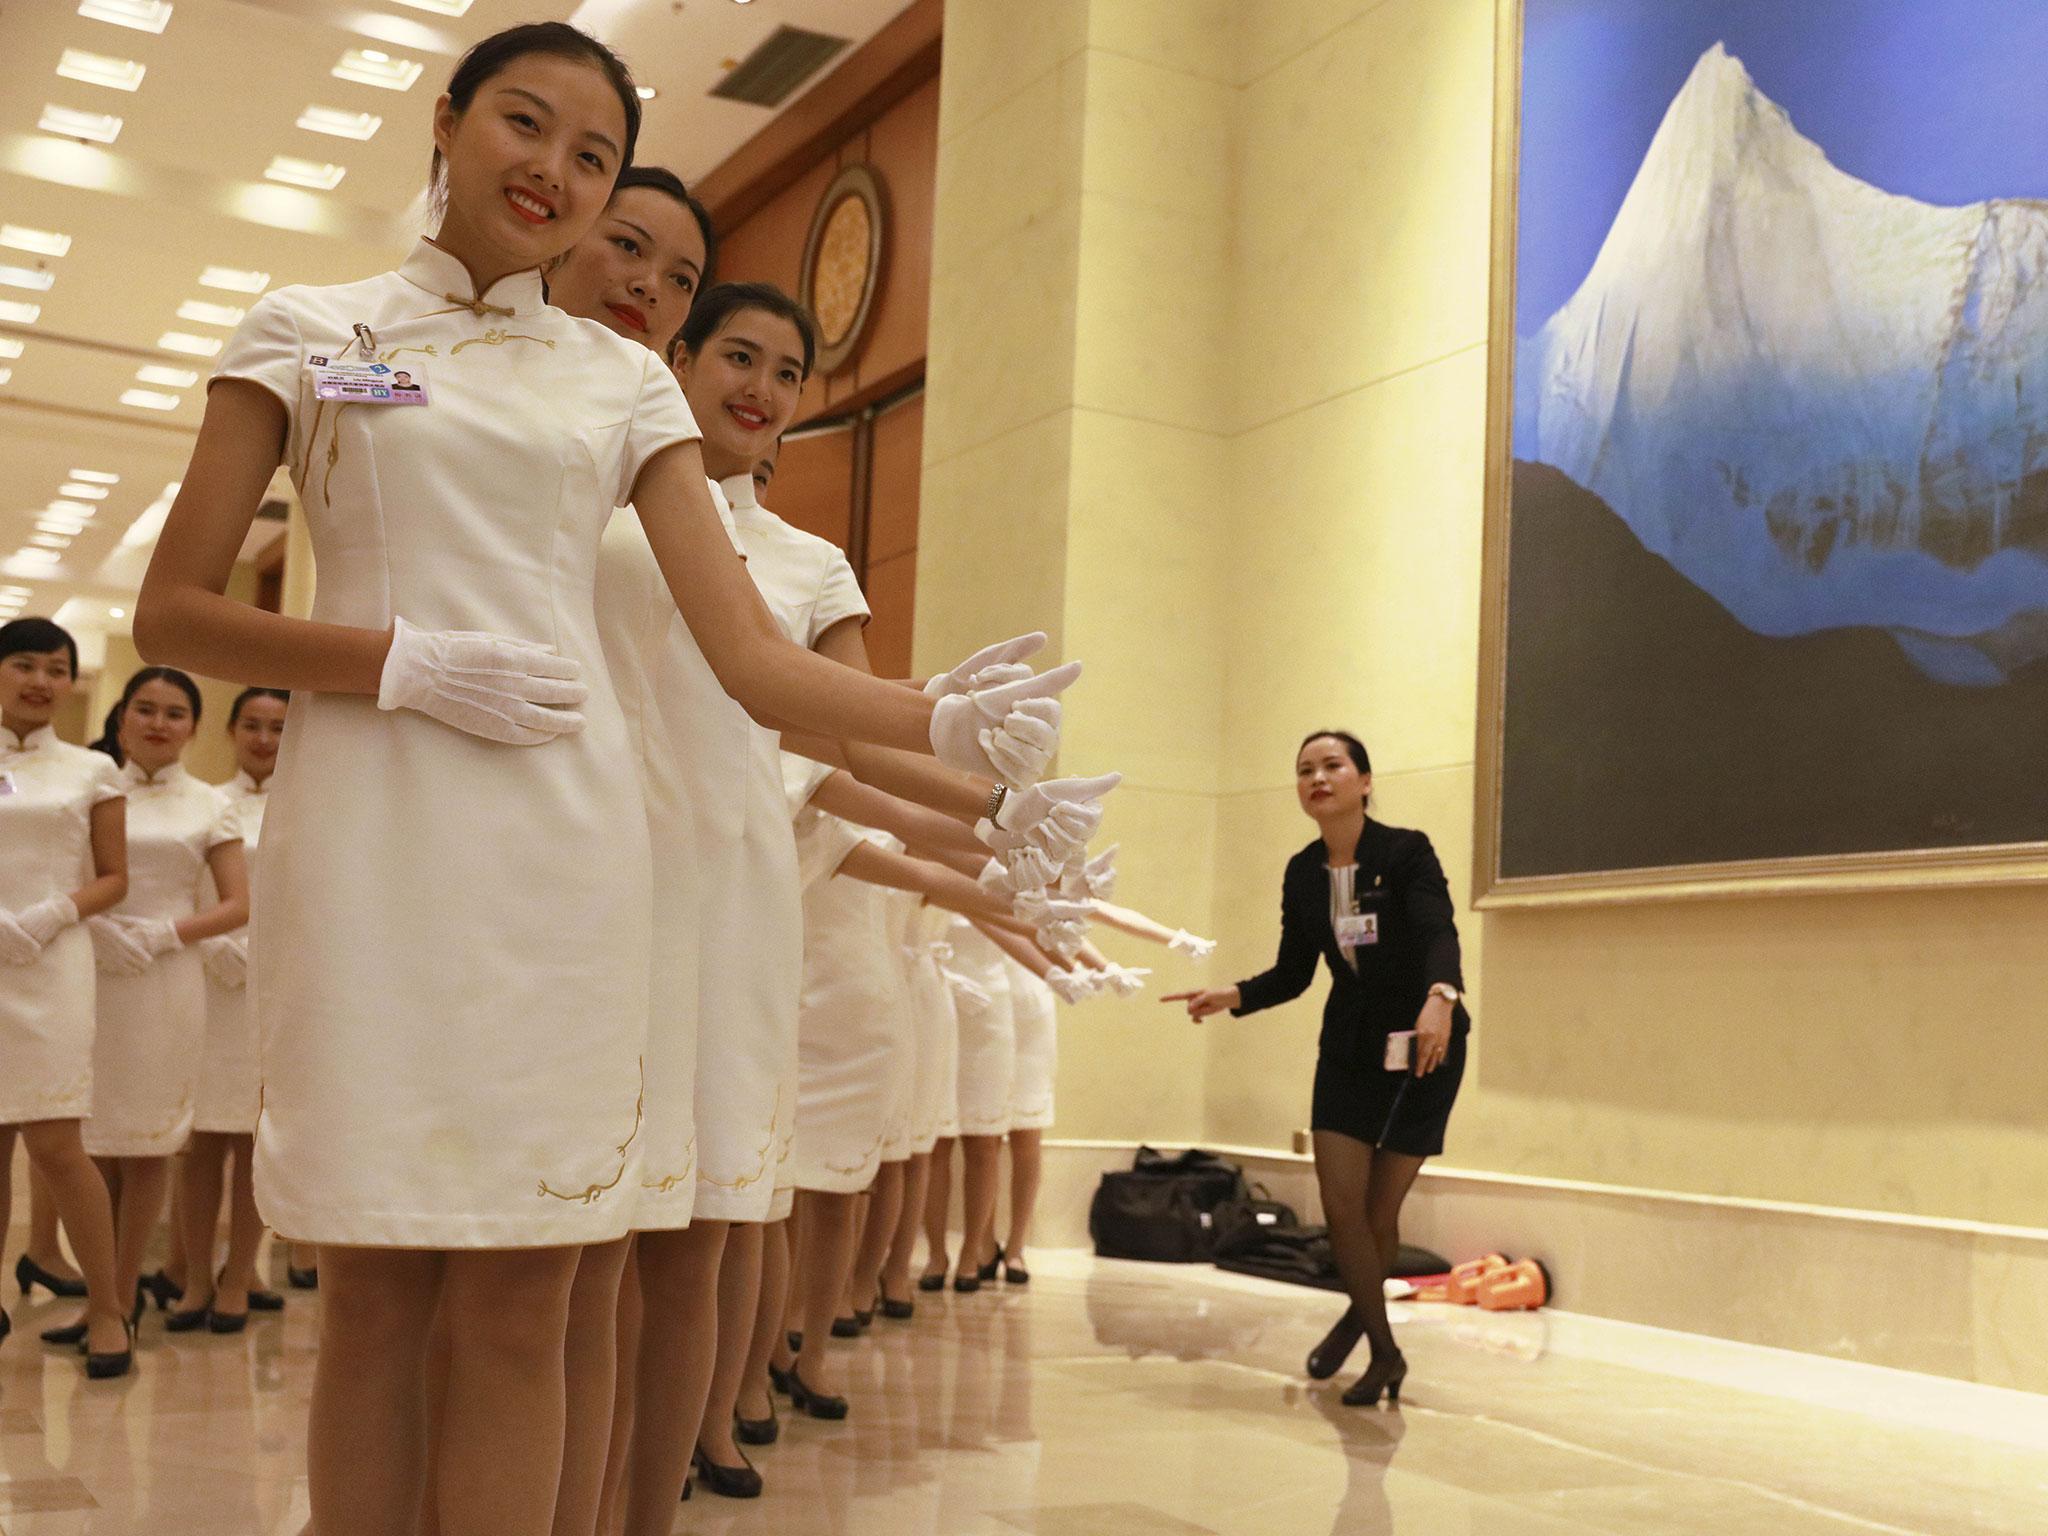 Chinese hostesses prepare for the arrival of world leaders and their staff at the G20 summit